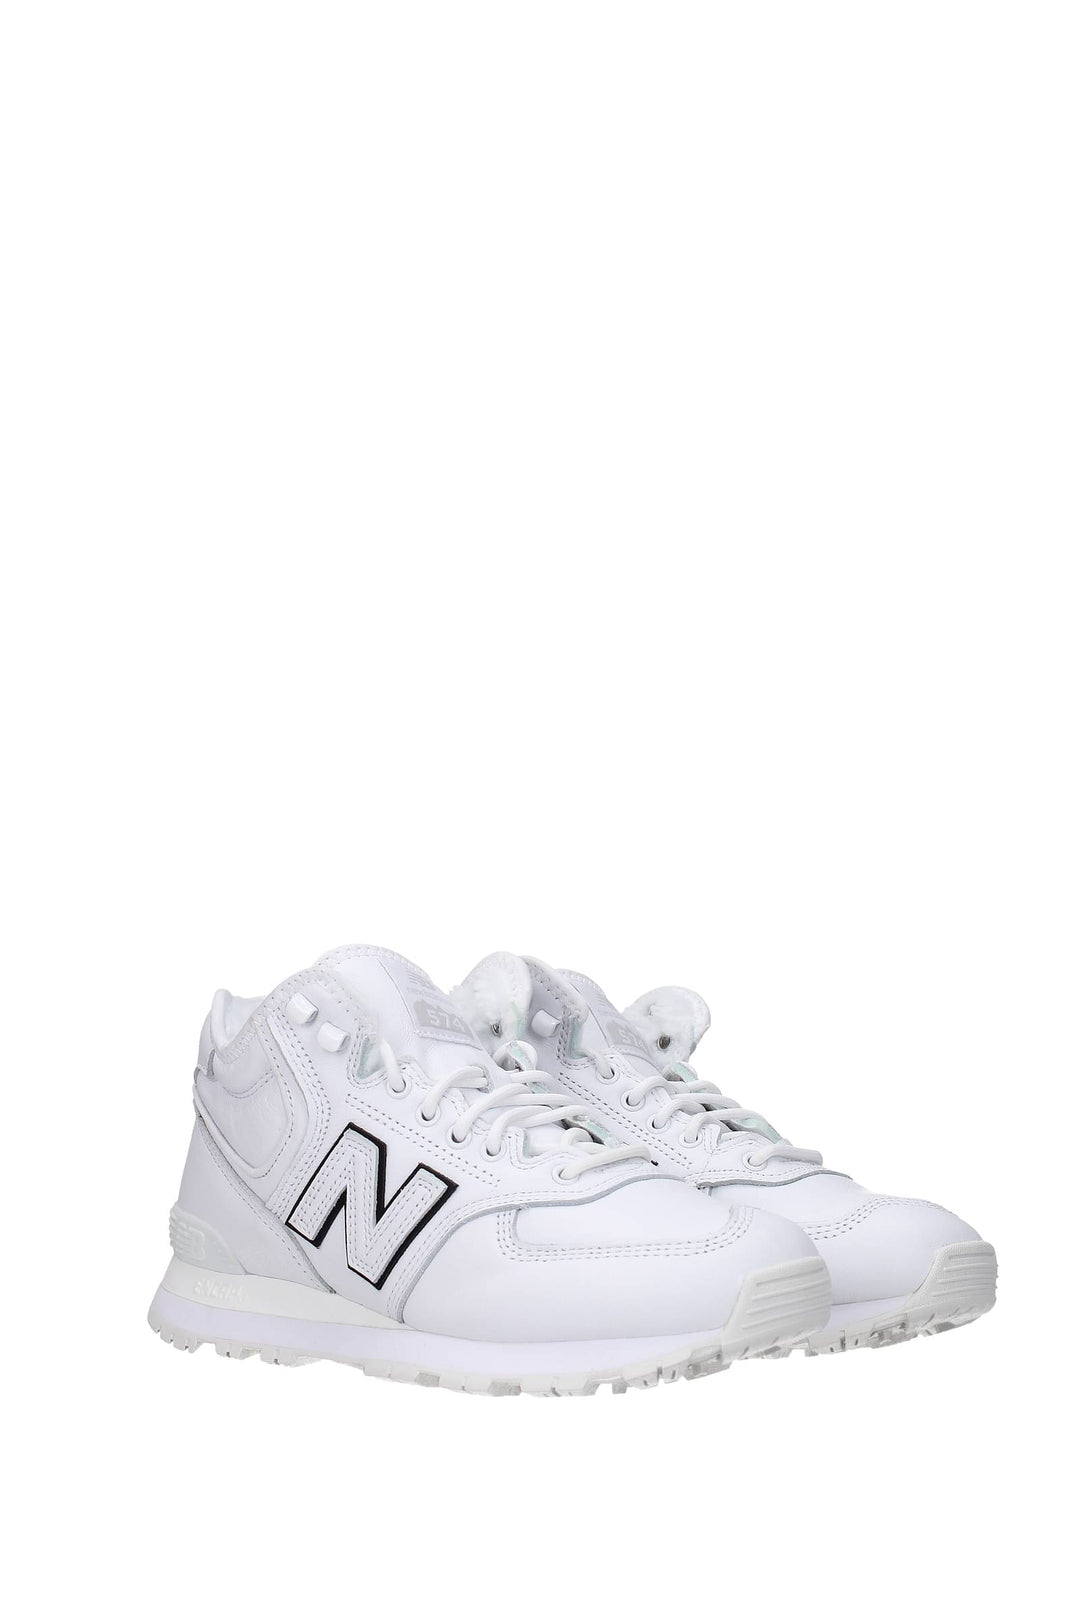 Sneakers Comme Des Garcons Pelle Bianco - New Balance - Uomo